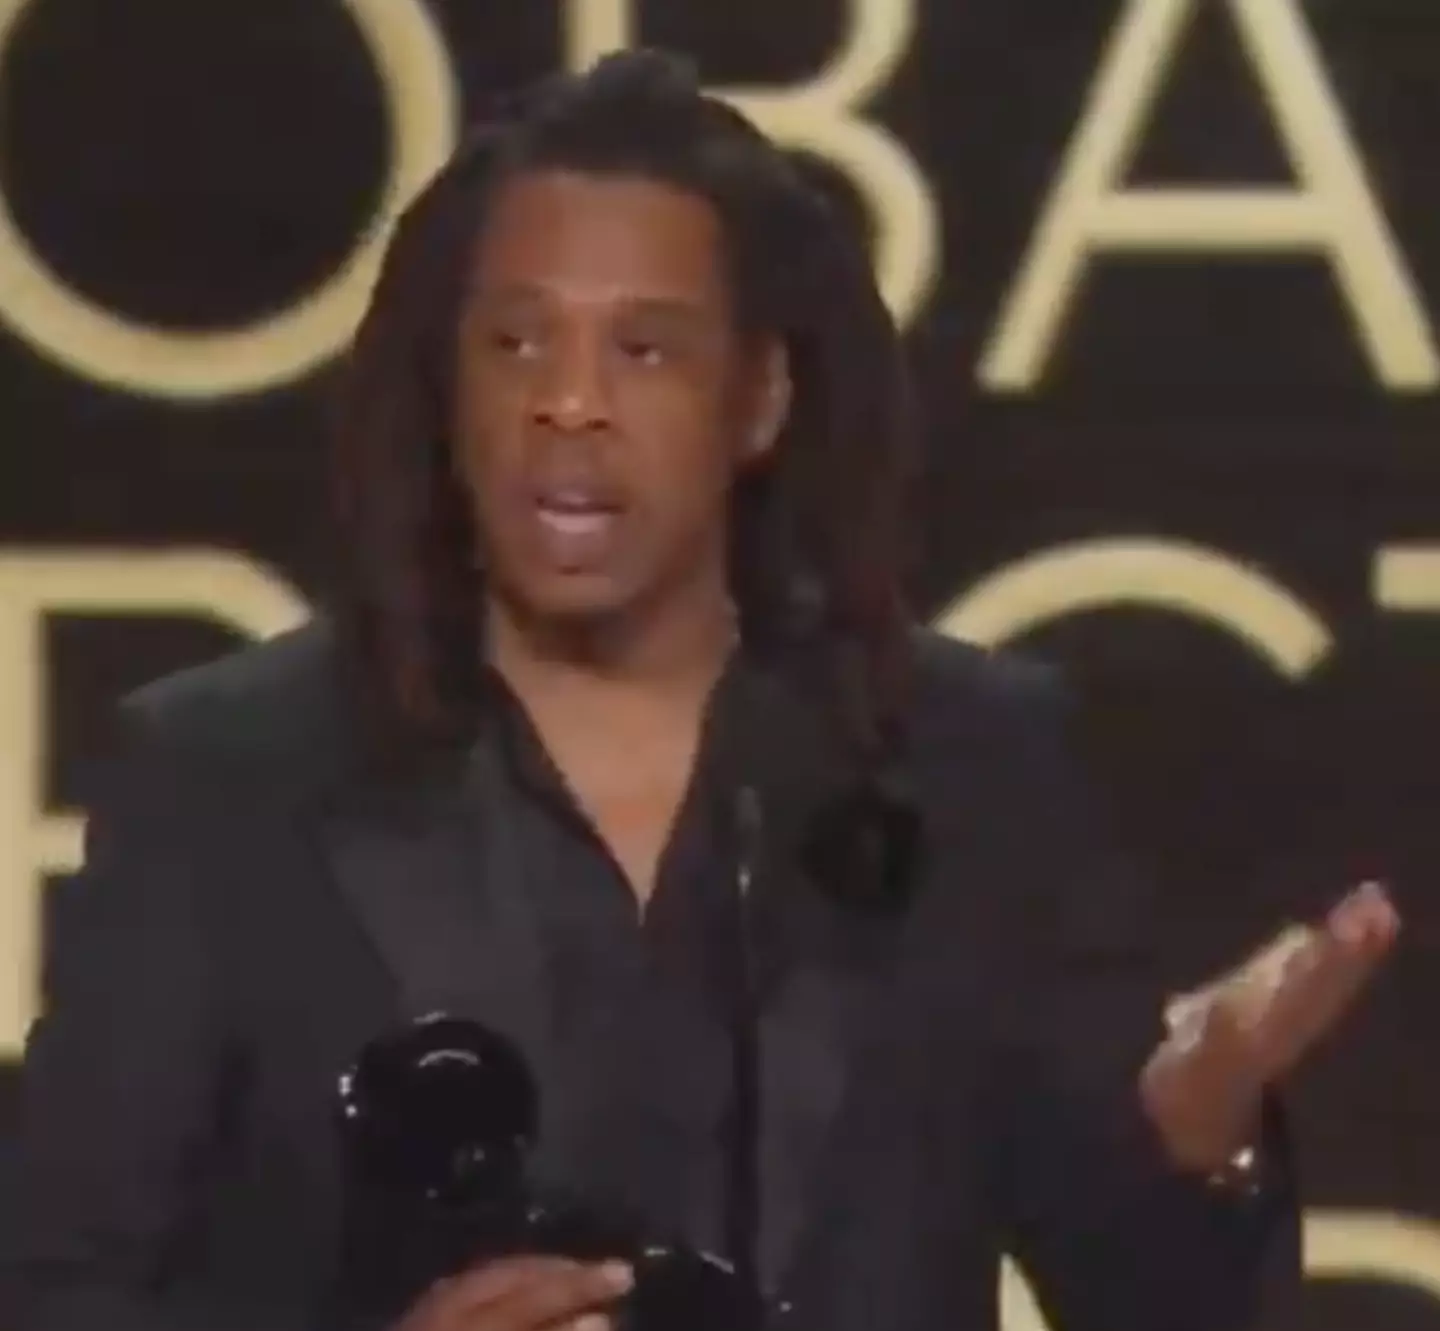 Jay-Z called out the awards for overlooking his wife Beyonce for album of the year again.